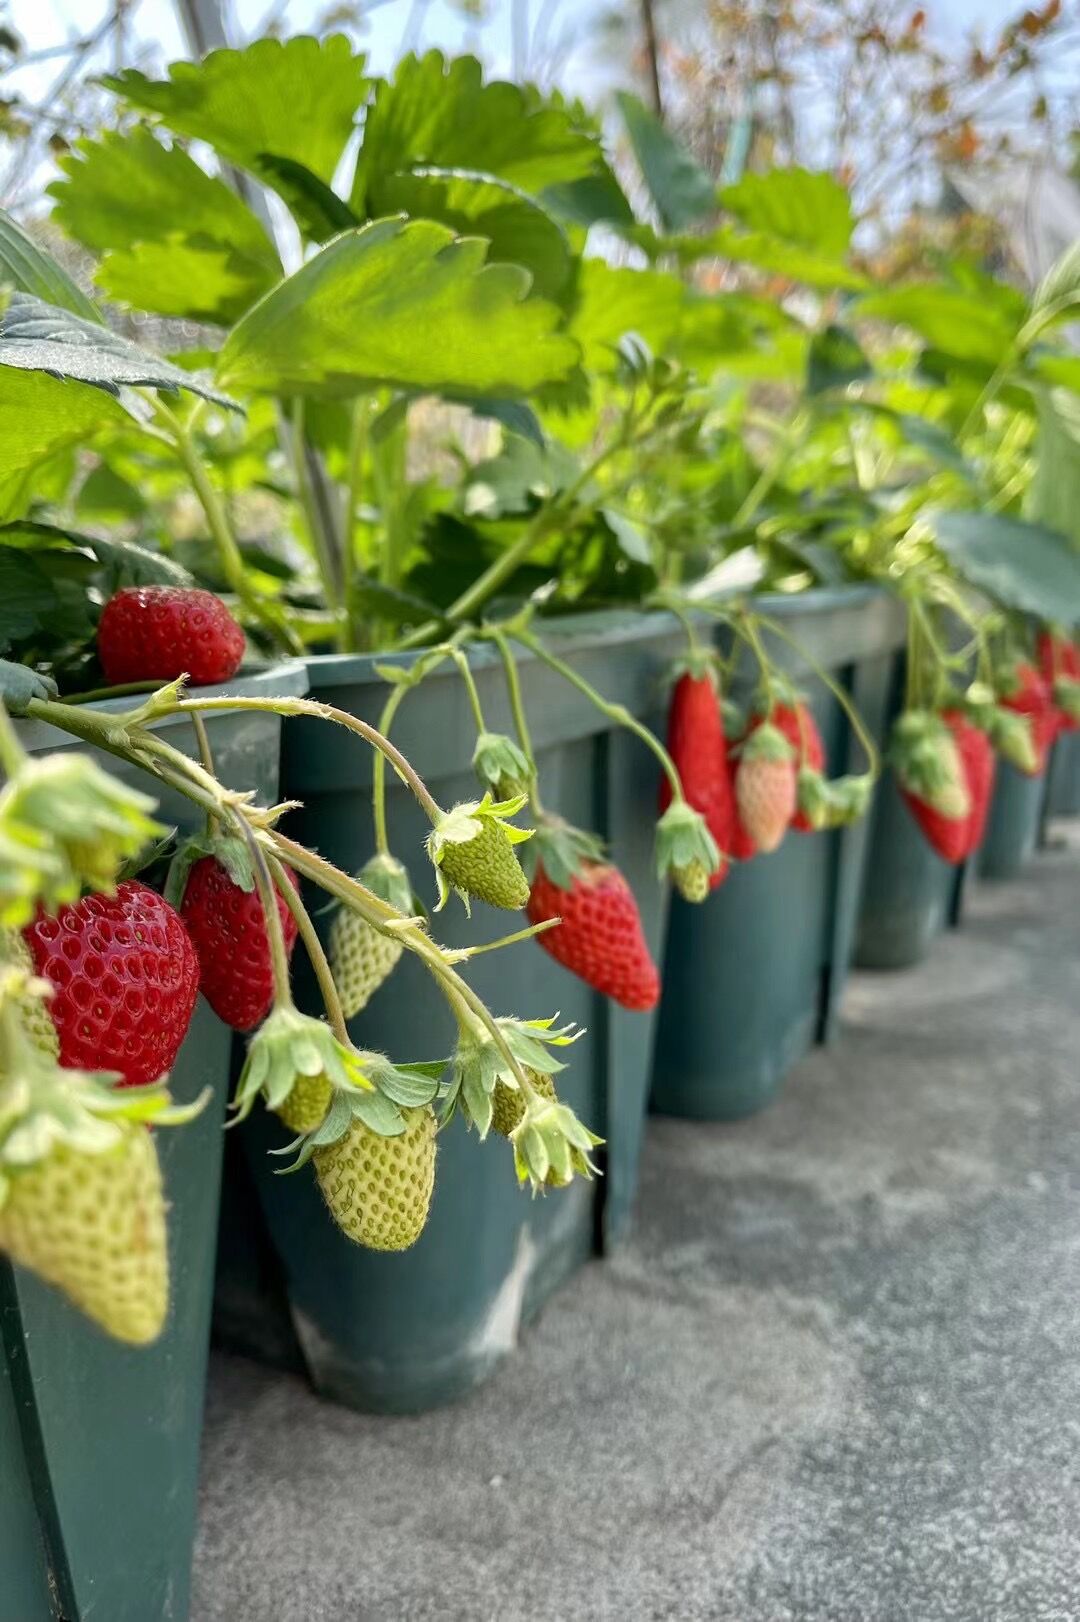 Planting and Growing Your Own Strawberries